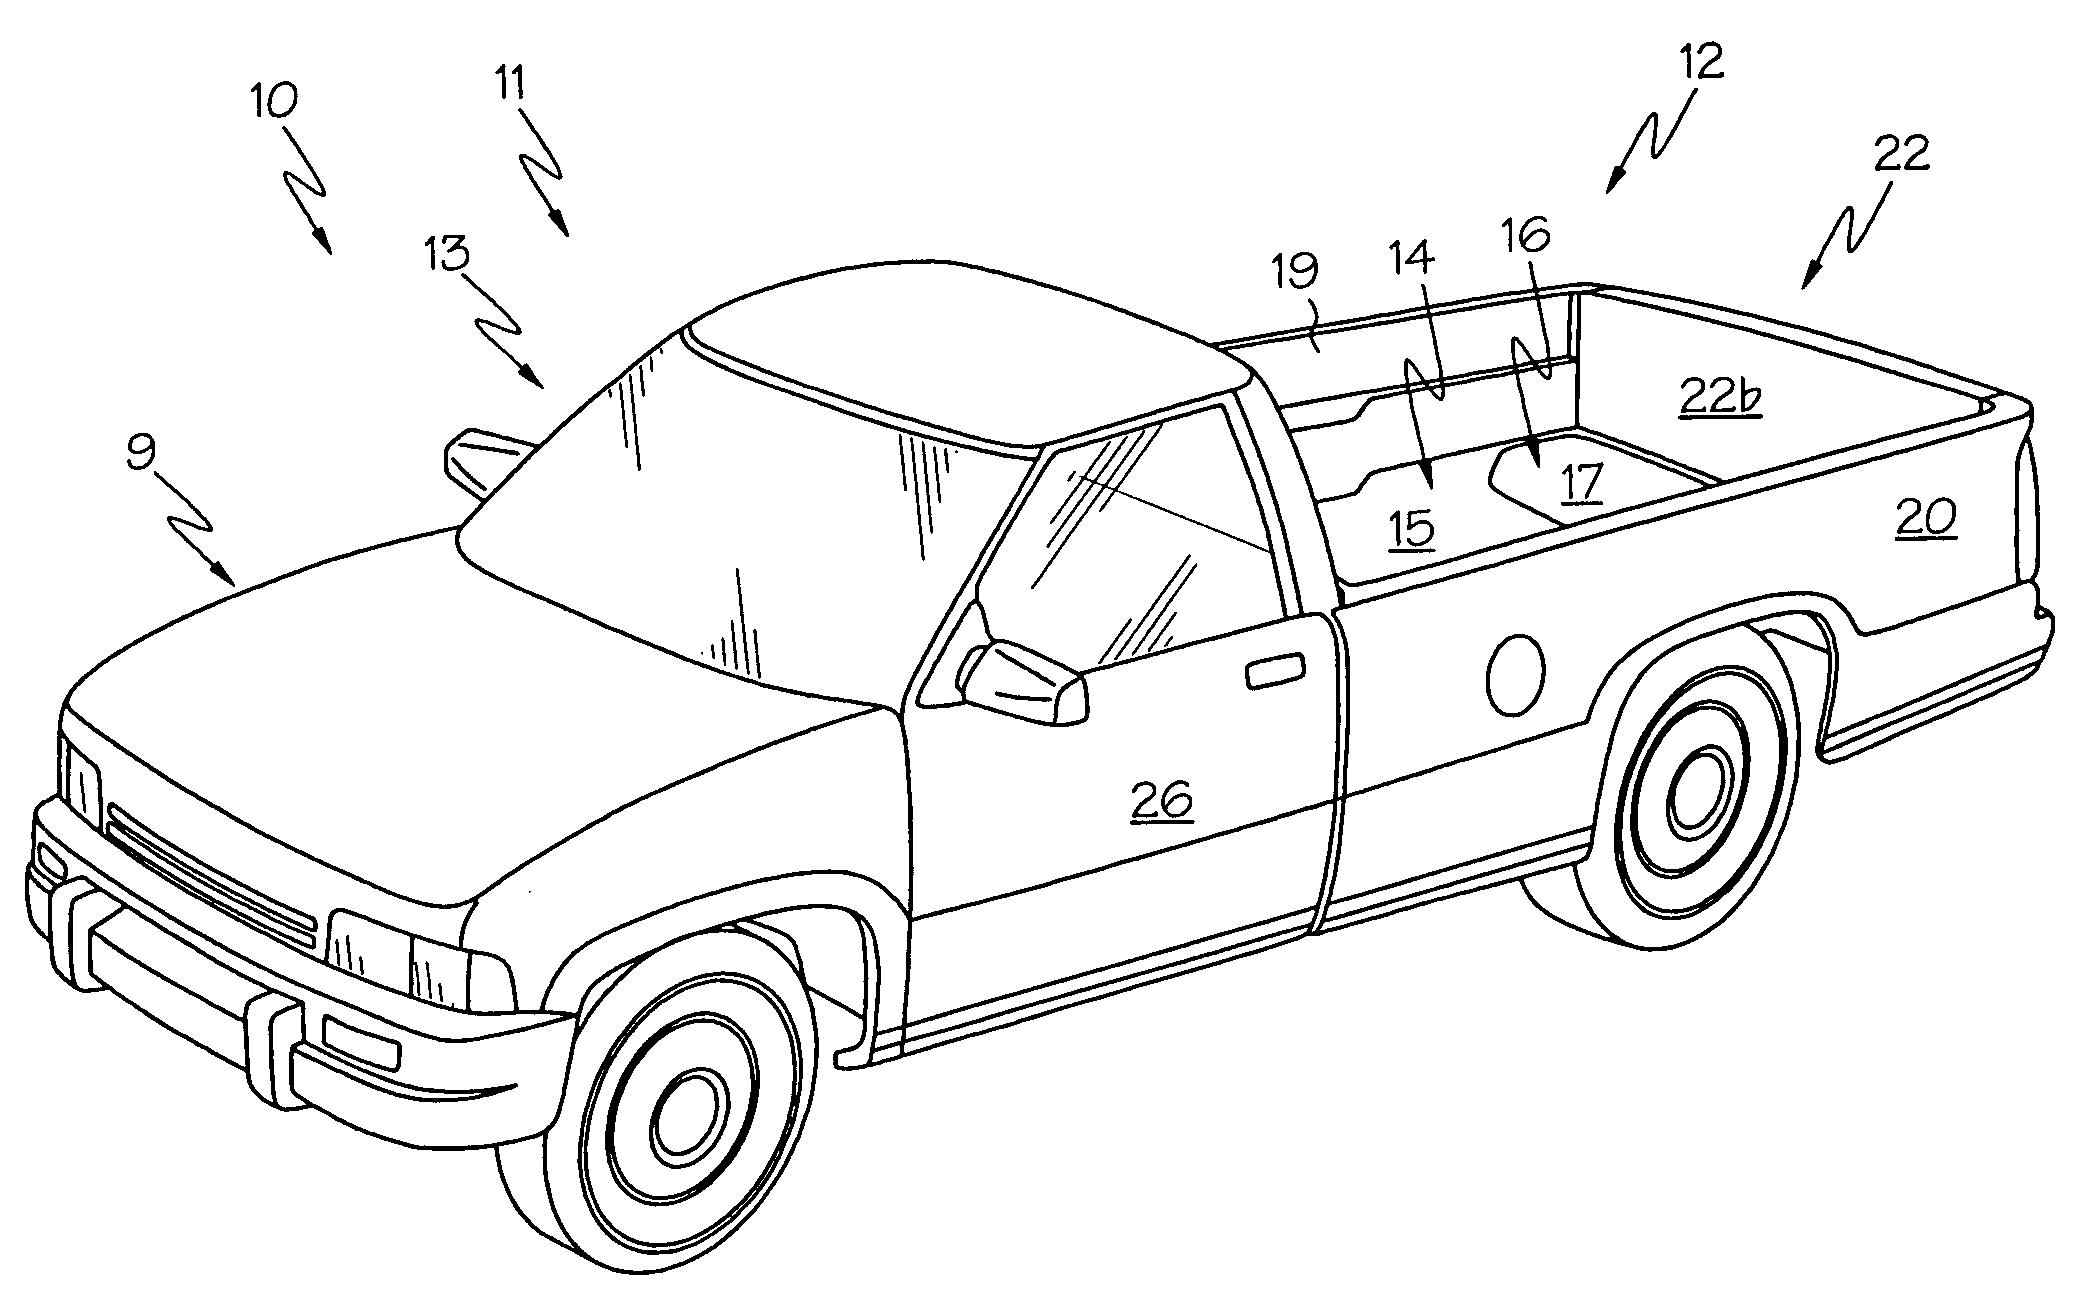 Cargo protecting system for a pickup truck